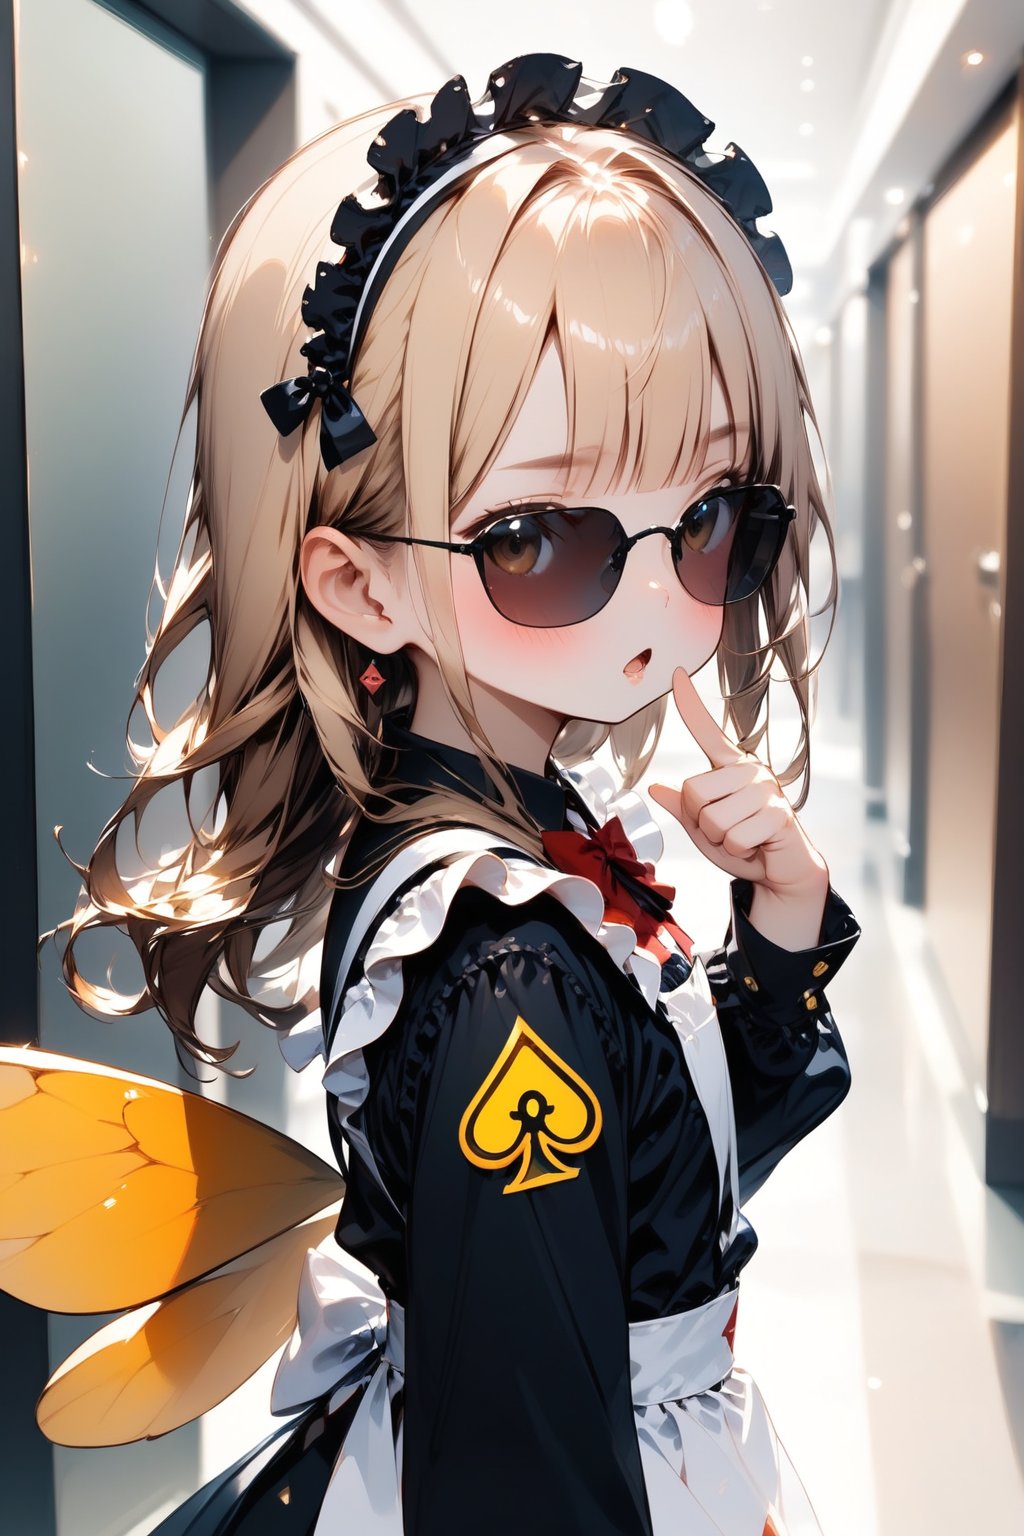 //quality, masterpiece:1.4, detailed:1.4, best quality:1.4,//,1girl,solo,loli,//,blonde hair,(long hair),blunt bangs,//,bee_wings,(sunglasses),spades_symbols,bow,maid headband,white maid_costume with spades_symbols,long_sleeves,white gloves,//,blush,mouth_open,serious,//,walking,hand_up,finger_up,looking_at_viewer,//,indoors, hallway,Deformed,agtsg,sunglasses,Details,Detailed Masterpiece,from_side,close-up,